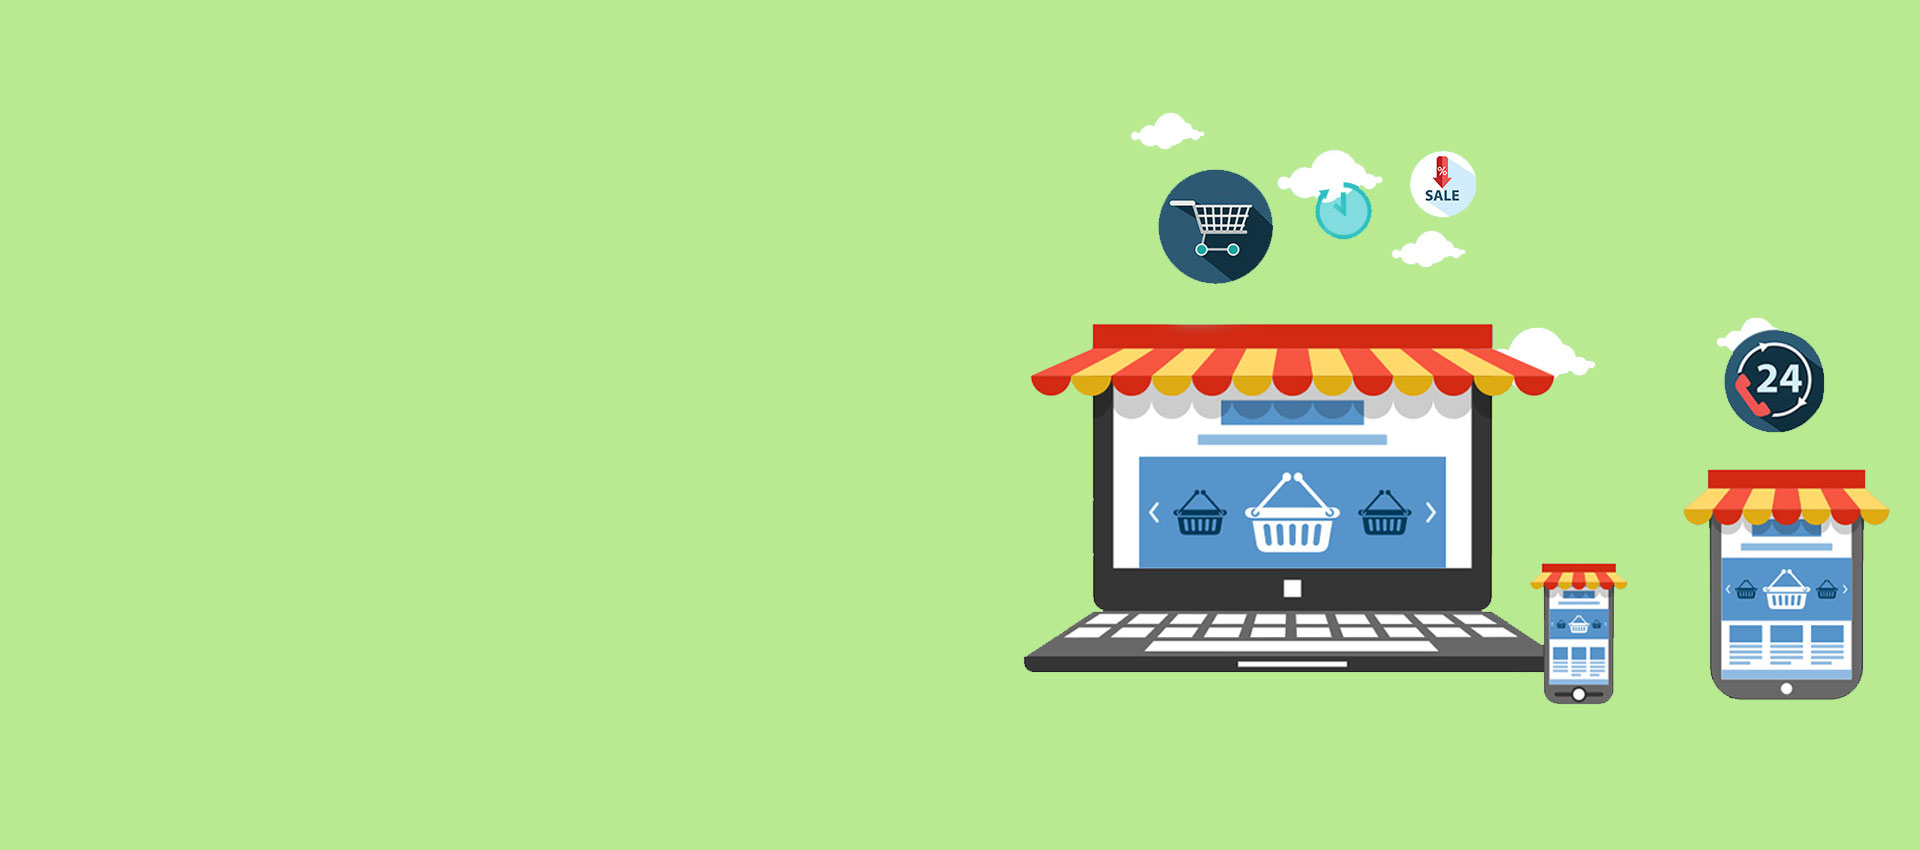 THE COMPLETE BEGINNER’S GUIDE FOR ECOMMERCE WEBSITE